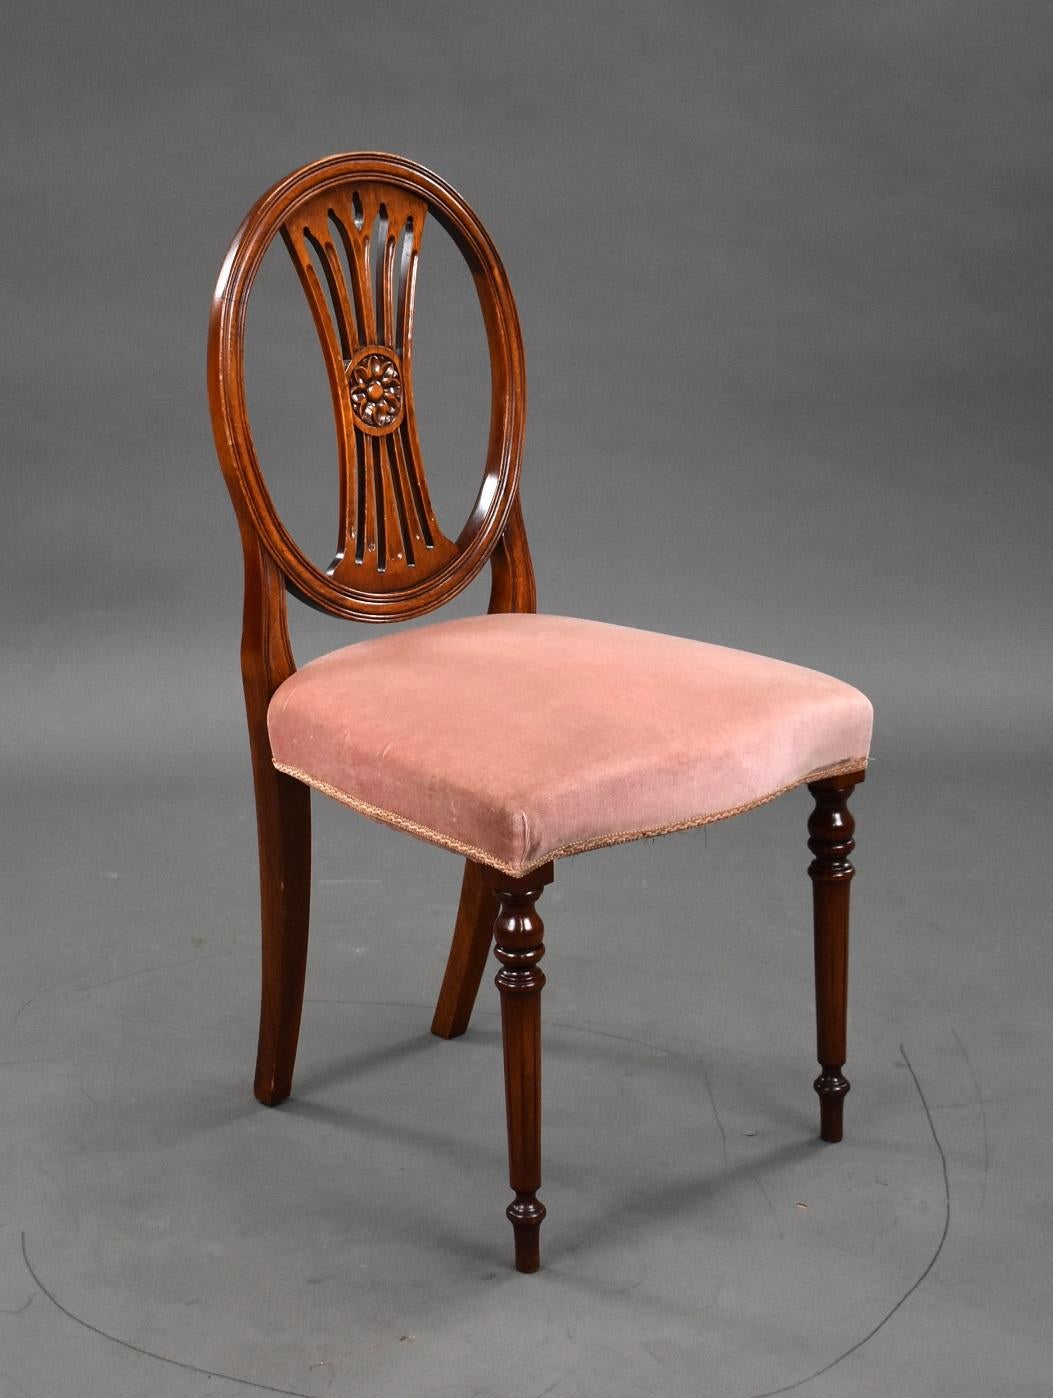 Set ten 20th century Mahogany dining chairs in good condition. The set comprises of eight singles and two carver chairs, the chairs have oval backs with carved motif to the centre standing on turned legs. The chairs have stuffover seats in a pink